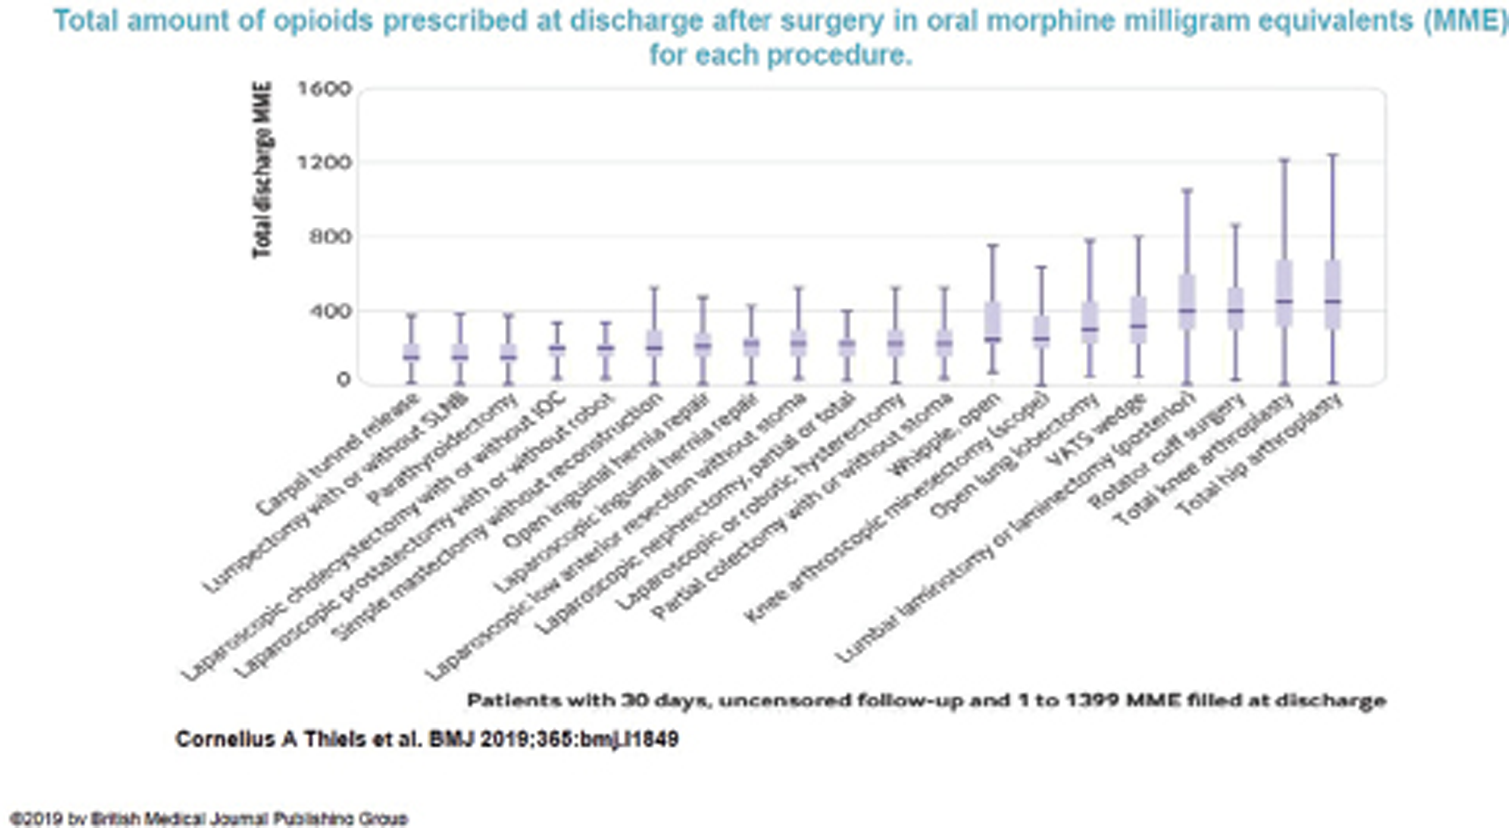 Total oral morphine equivalents (MME) prescribed at discharge after common surgical procedures.